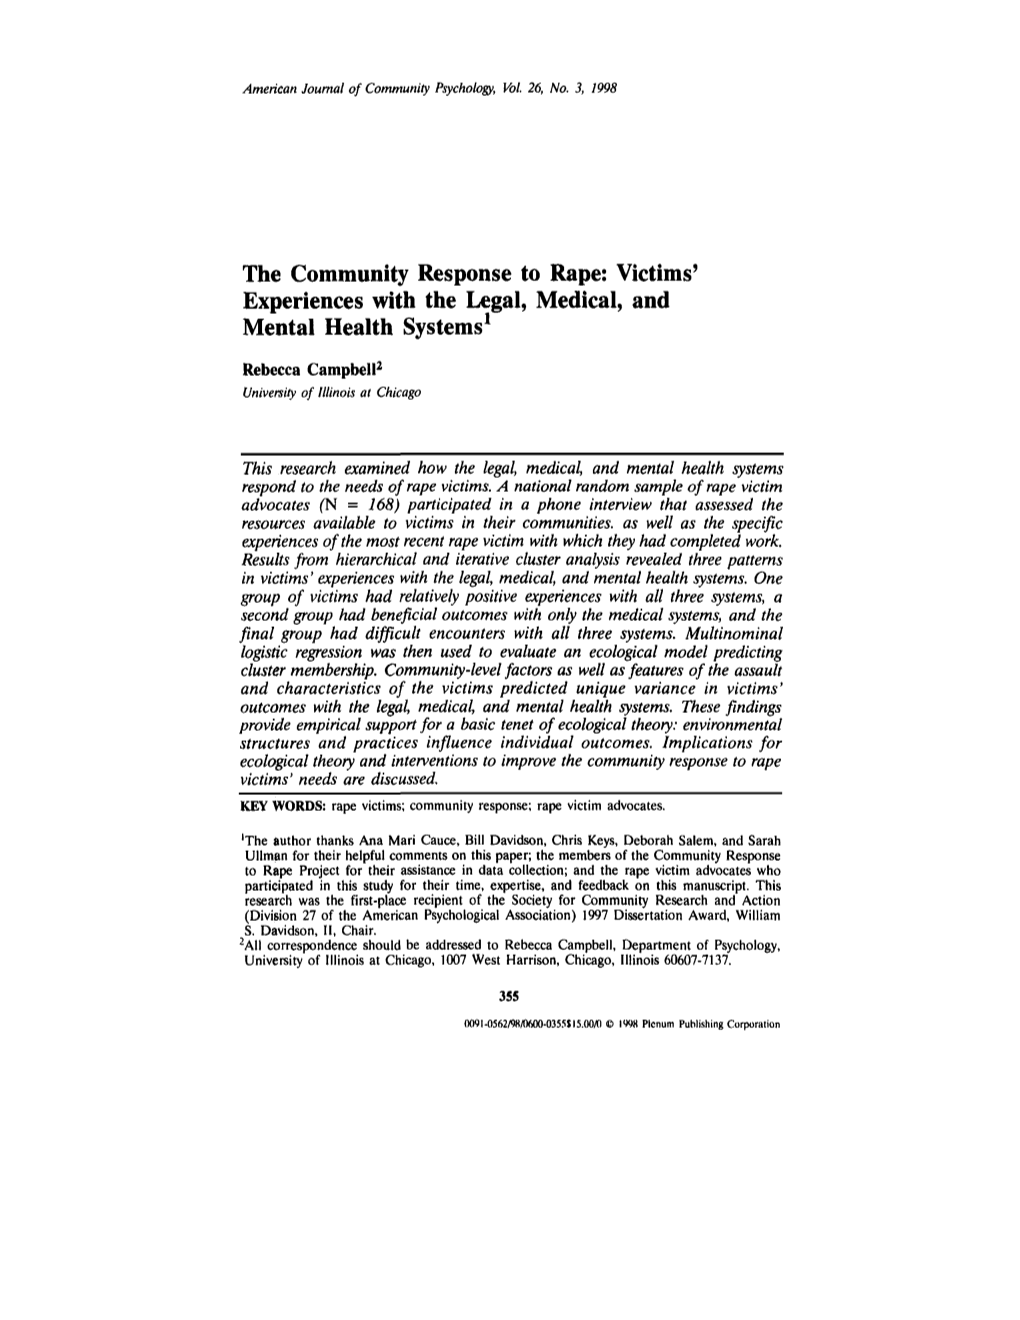 The Community Response to Rape: Victims' Experiences with the Legal, Medical, and Mental Health Systems1